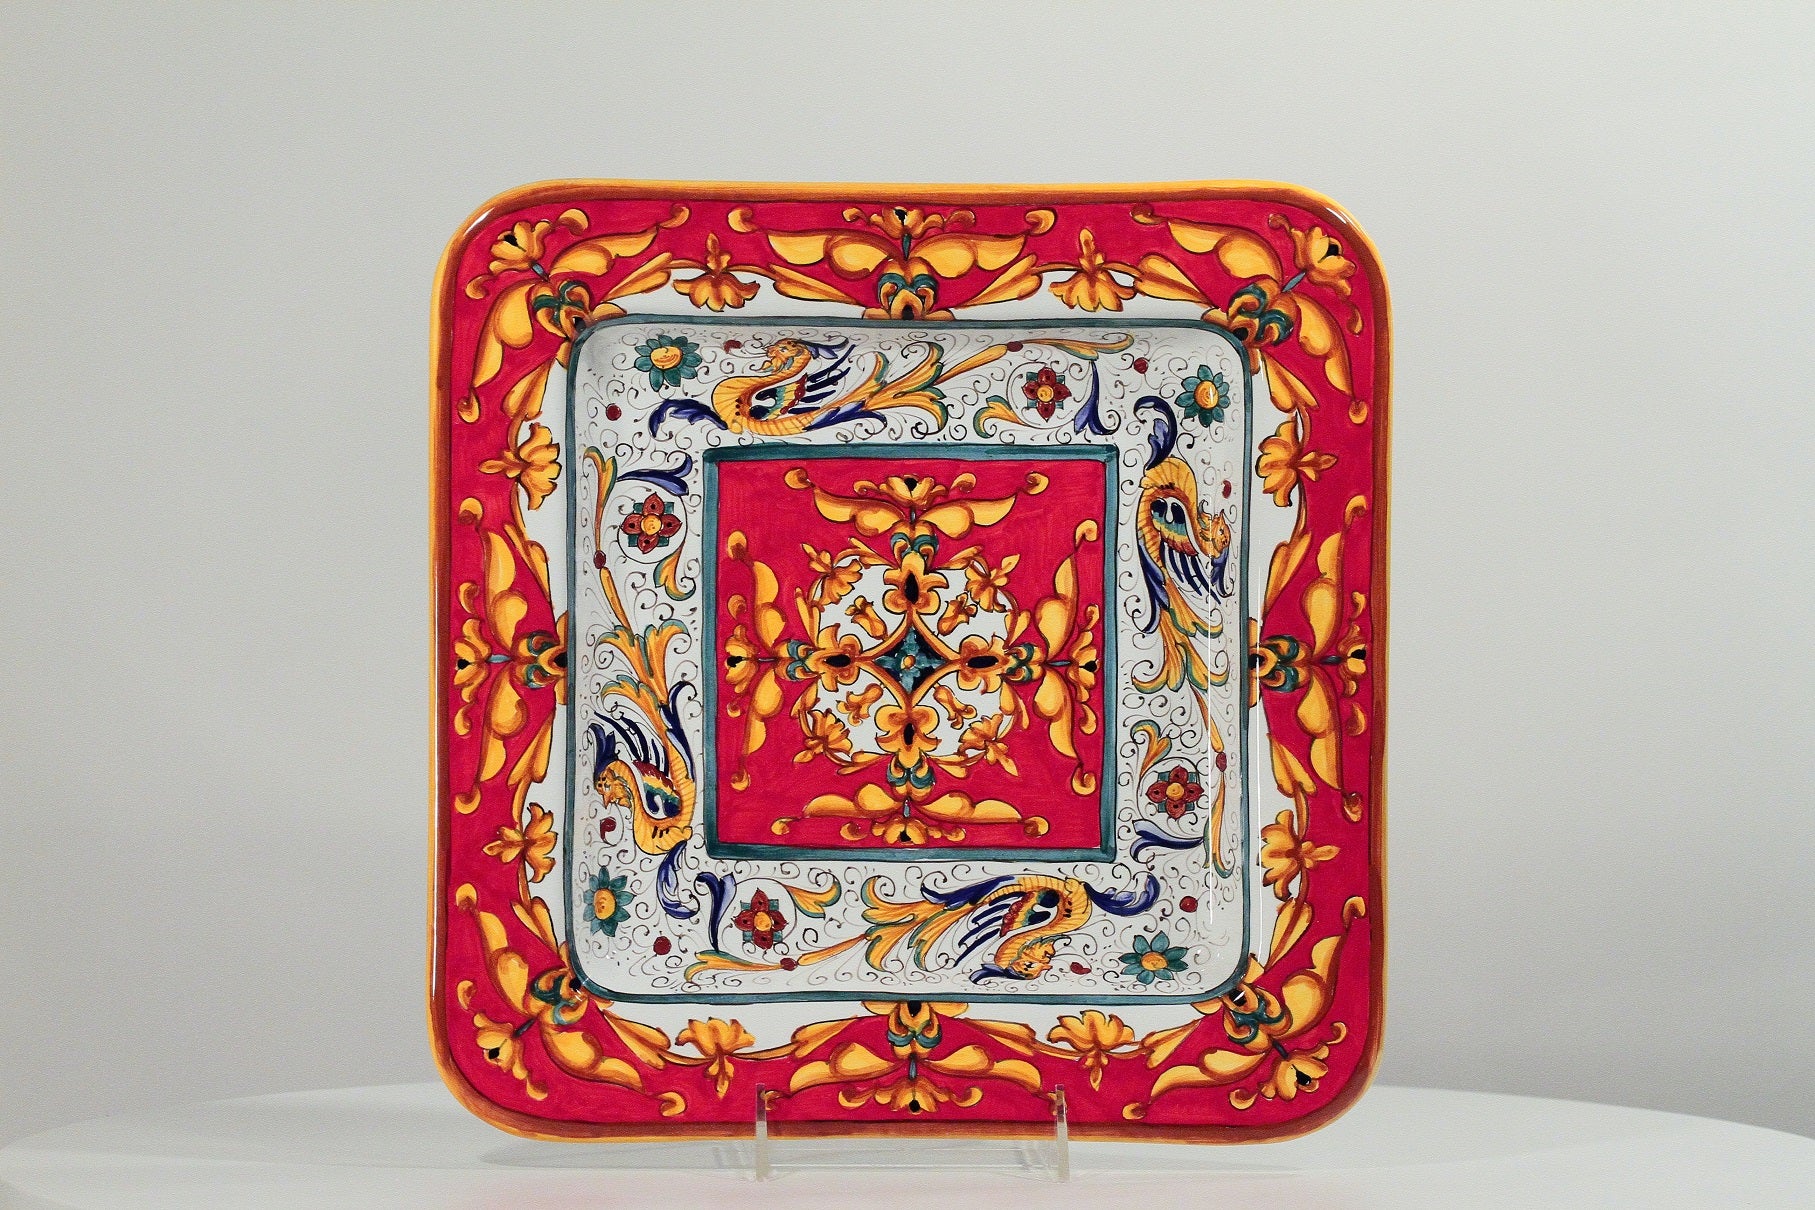 Pia Raffaellesco Vario Rosso Square Tray, ceramics, pottery, italian design, majolica, handmade, handcrafted, handpainted, home decor, kitchen art, home goods, deruta, majolica, Artisan, treasures, traditional art, modern art, gift ideas, style, SF, shop small business, artists, shop online, landmark store, legacy, one of a kind, limited edition, gift guide, gift shop, retail shop, decorations, shopping, italy, home staging, home decorating, home interiors